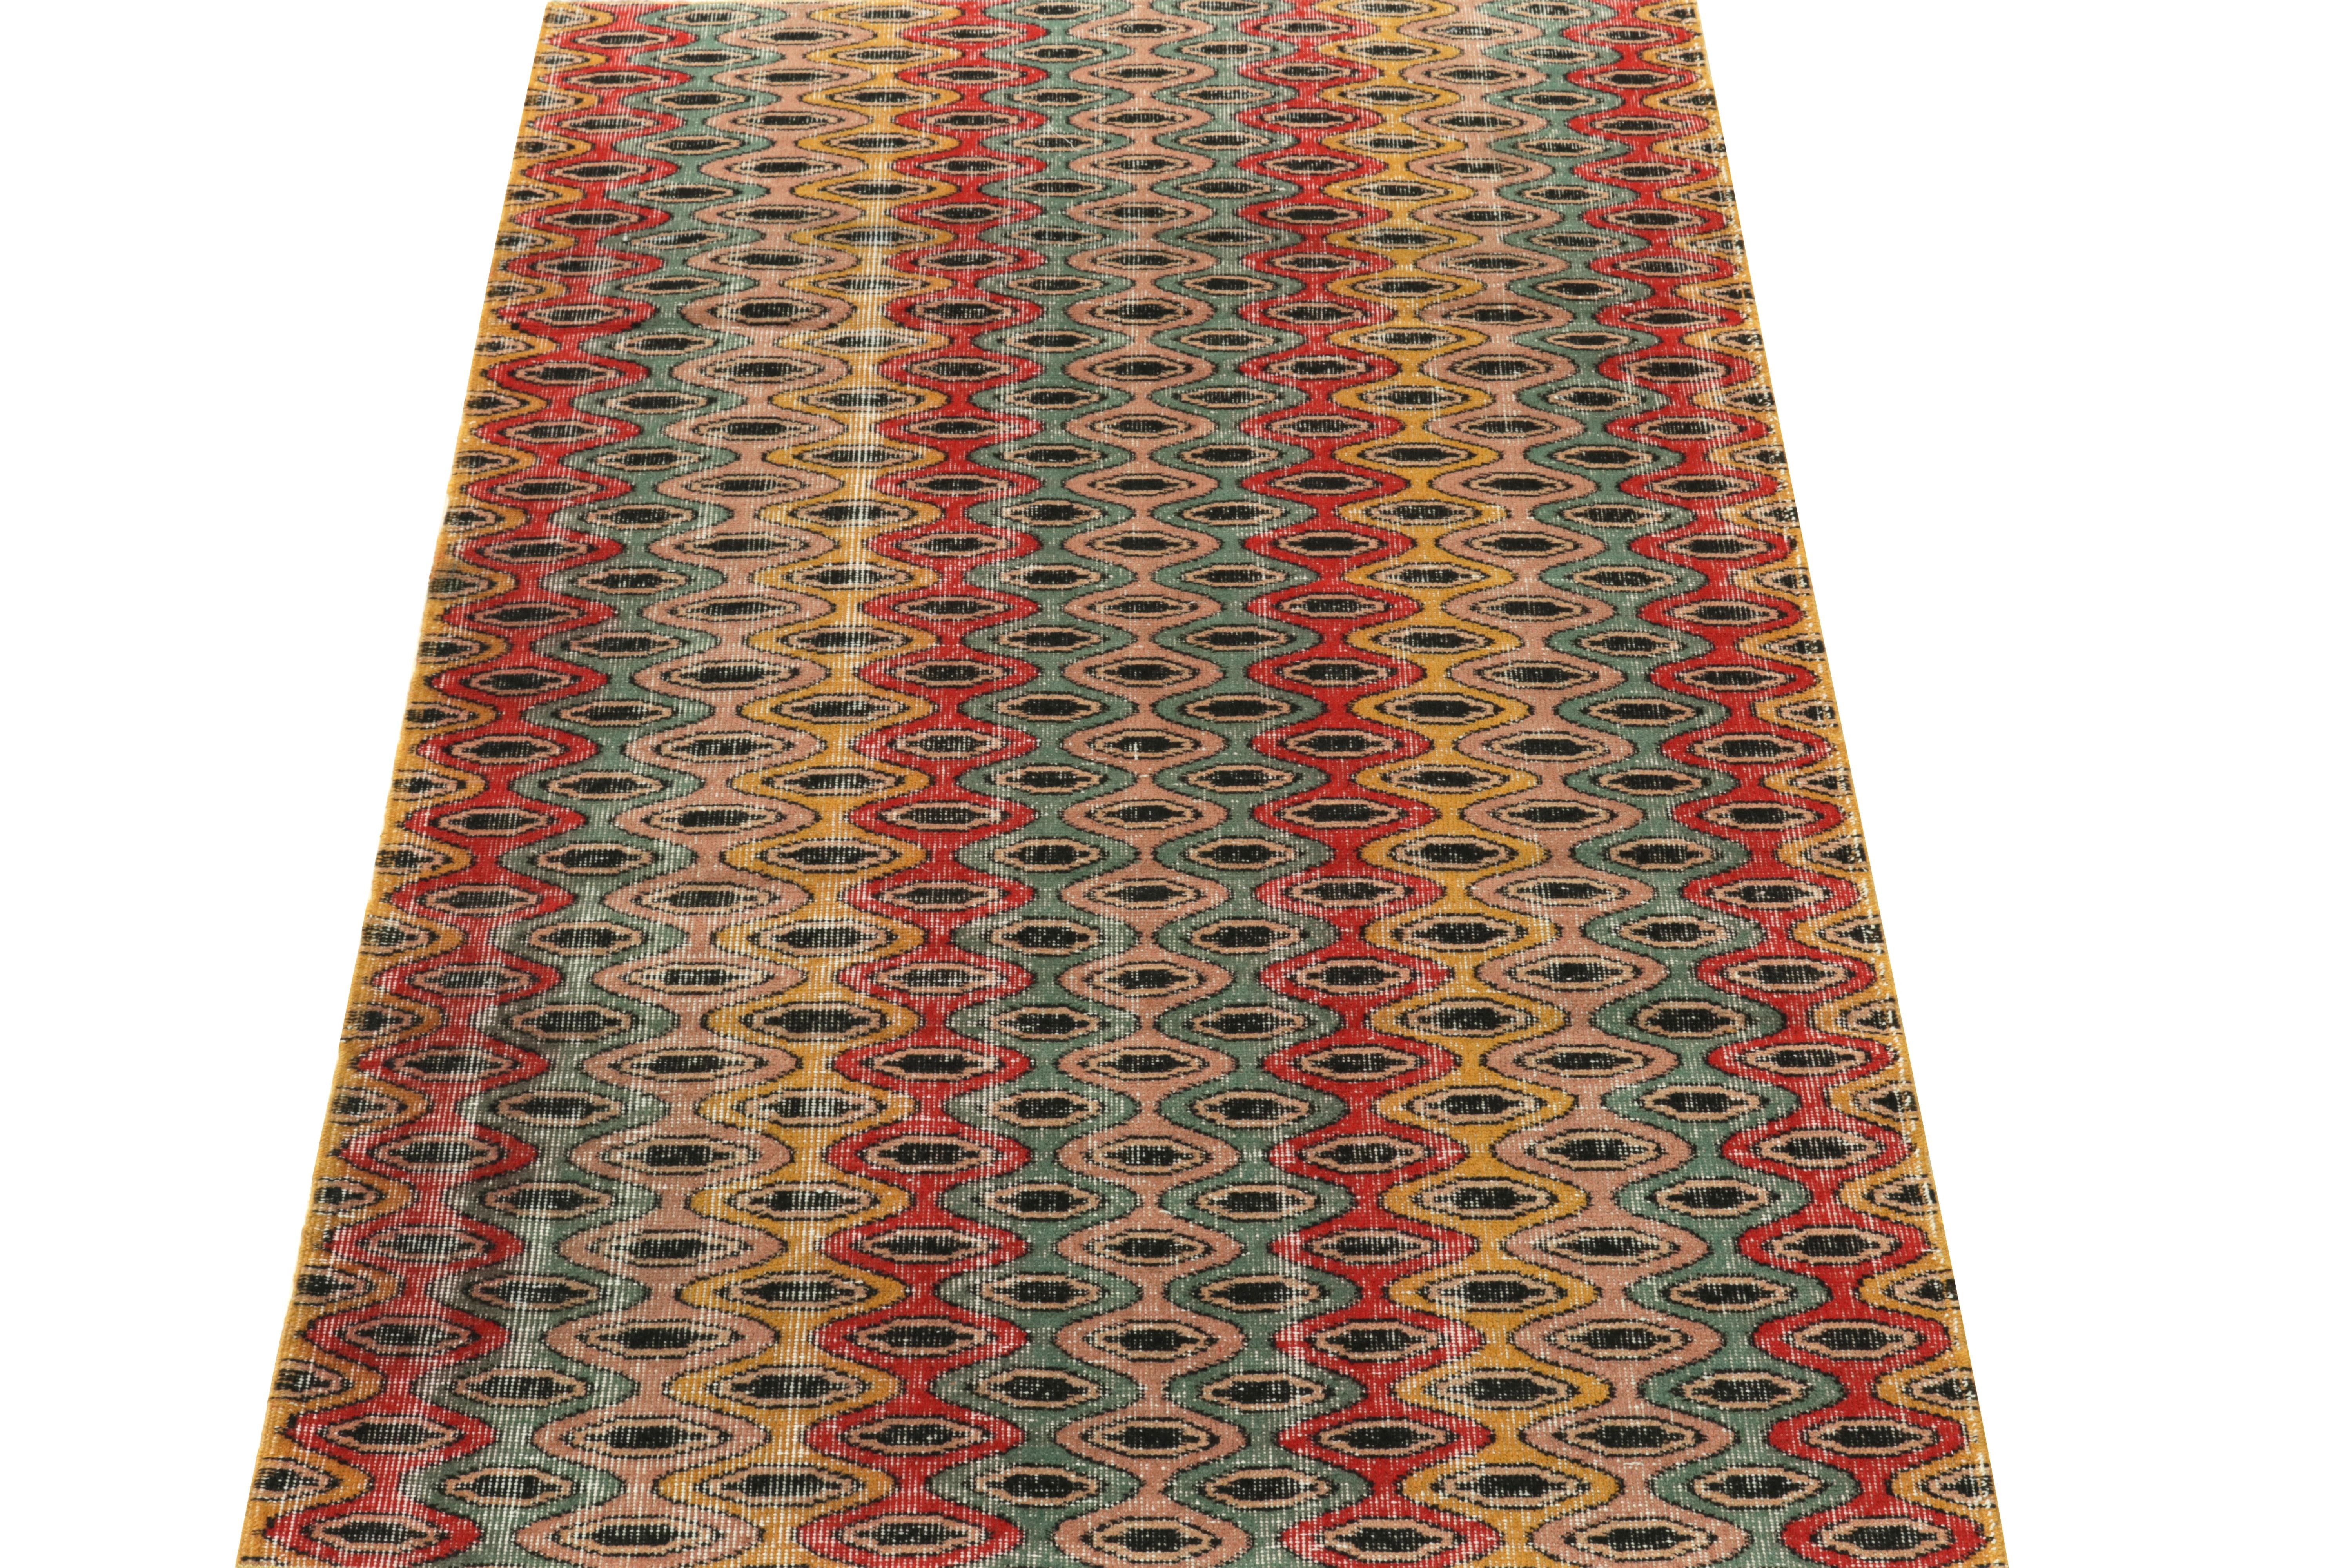 Hand-knotted in Turkey originating between 1960-1970, this vintage 4x7 Mid-Century Modern rug is the latest to join our Midcentury Pasha collection, celebrating Turkish icon and multidisciplinary designer Zeki Müren with Josh’s hand picked favorites